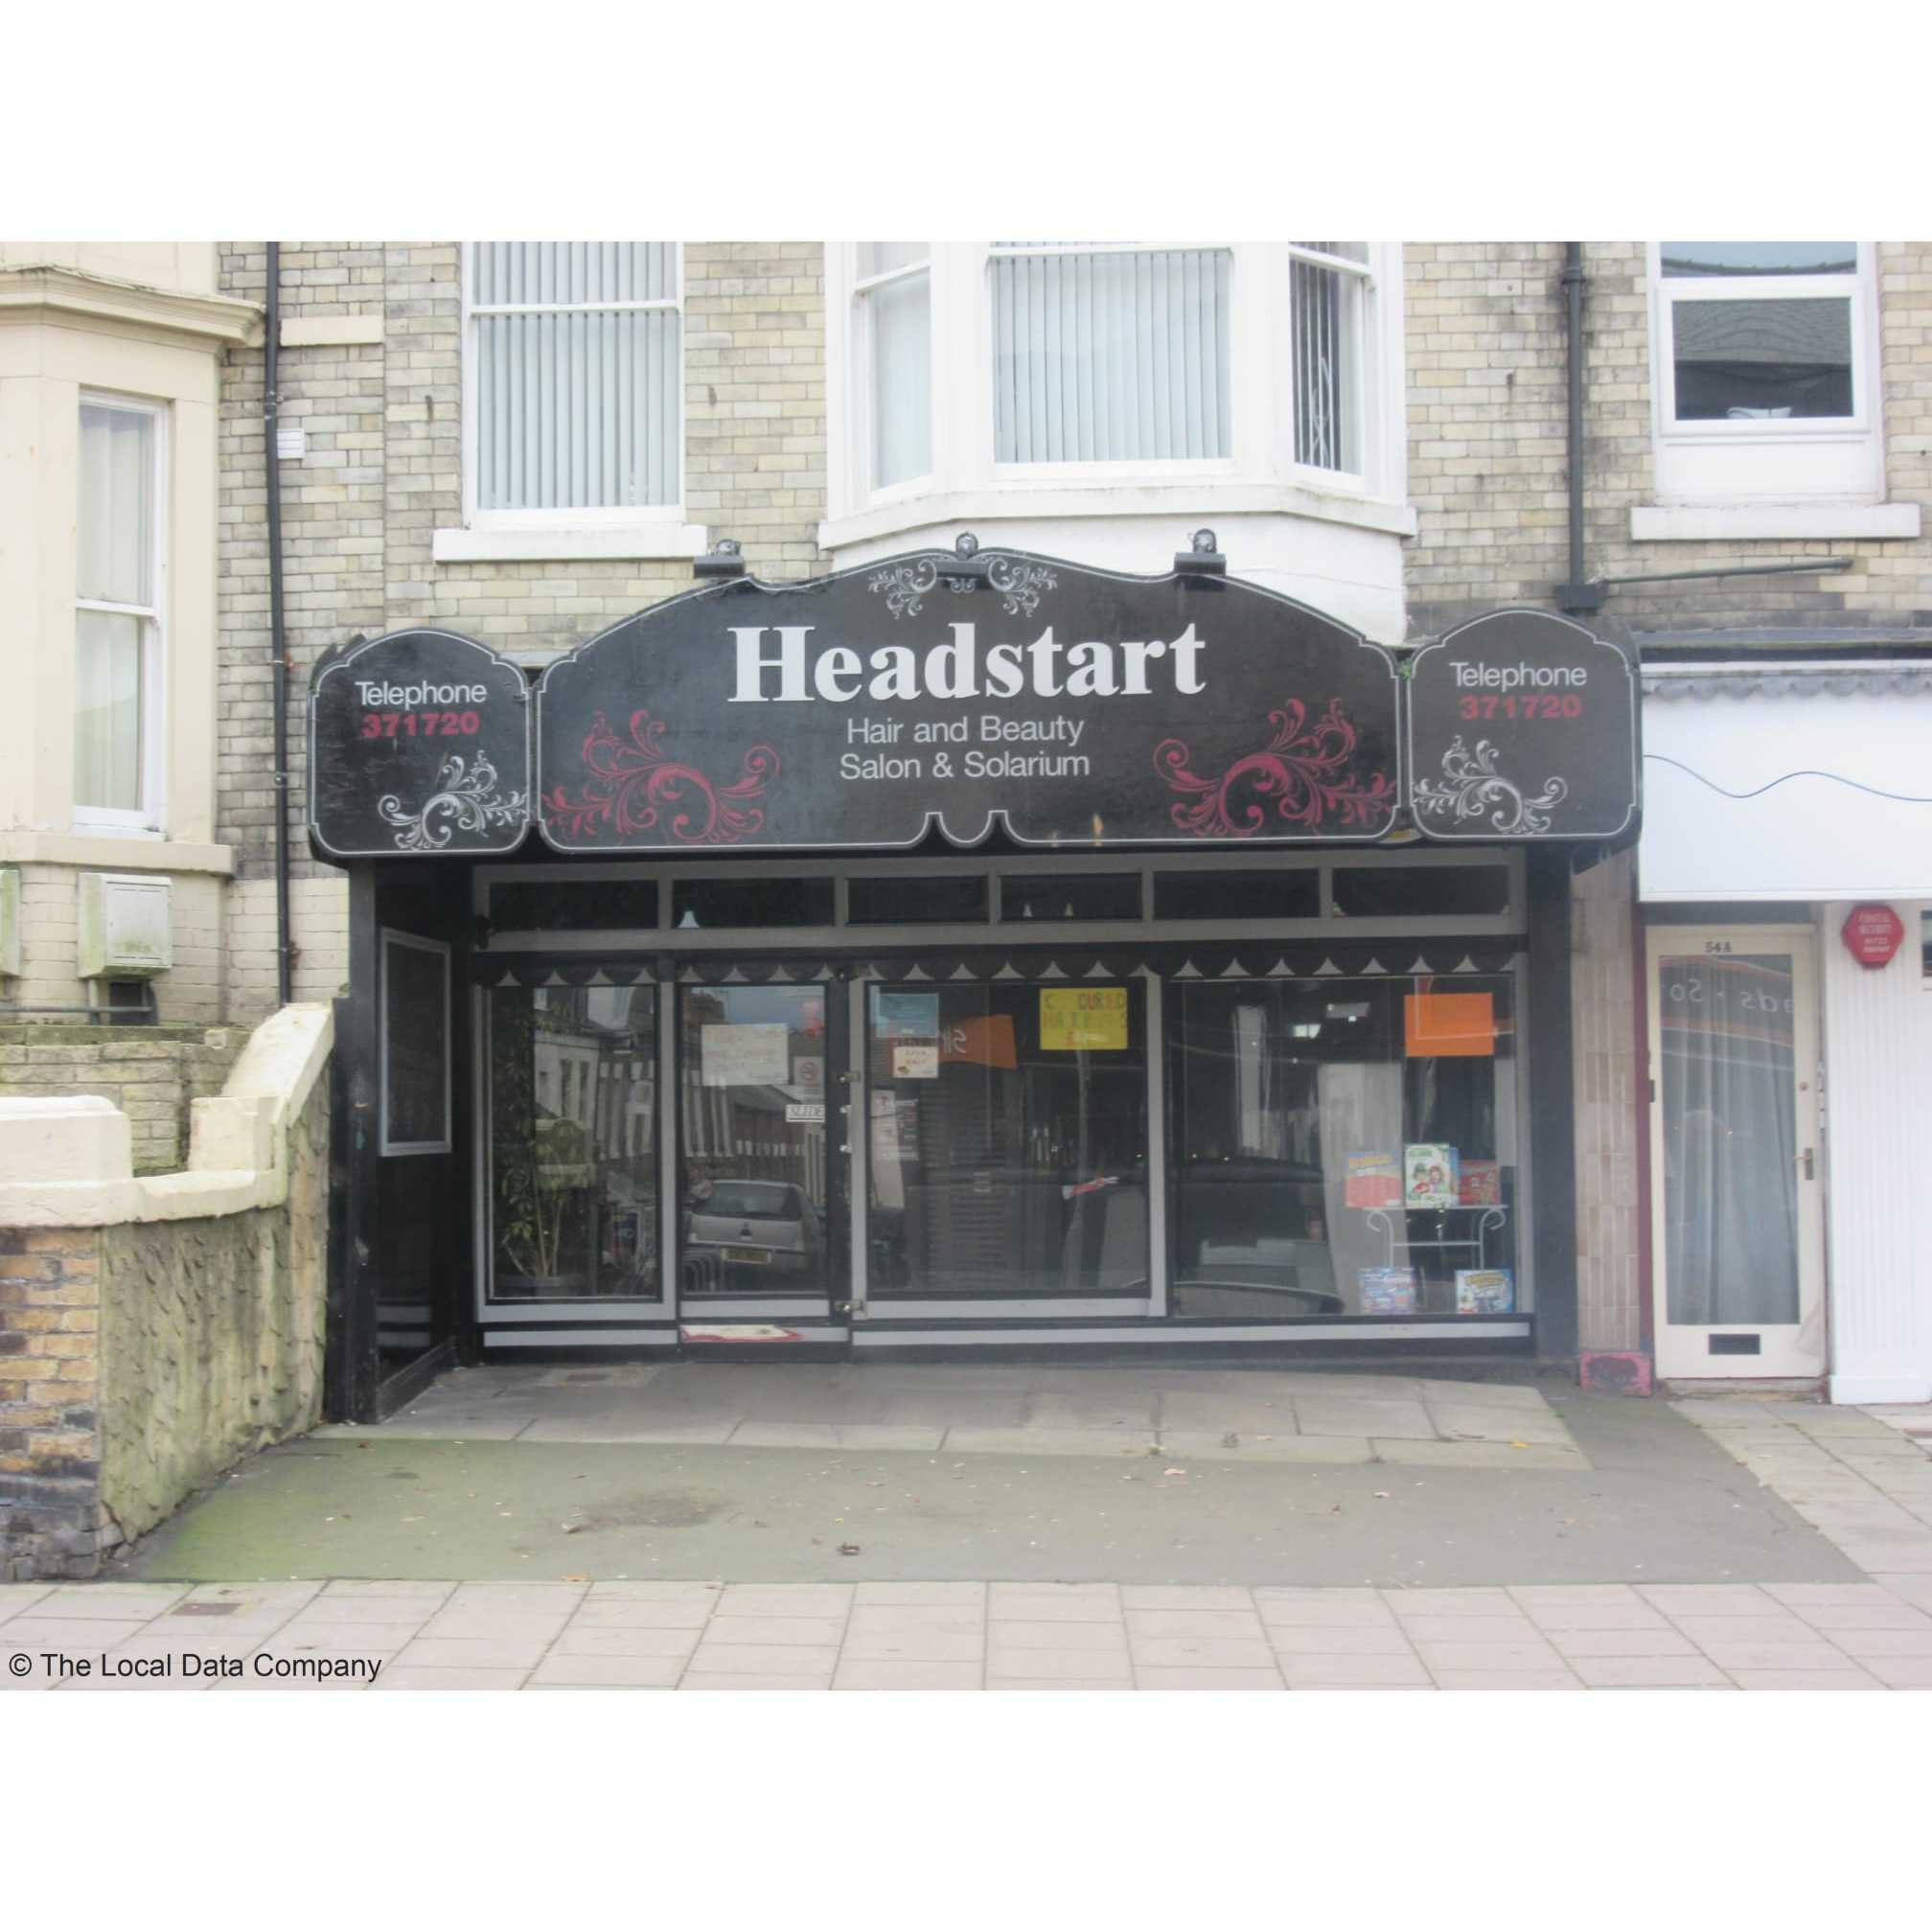 Headstart Hair, Beauty and Nails - Scarborough, North Yorkshire YO11 1XW - 01723 371720 | ShowMeLocal.com